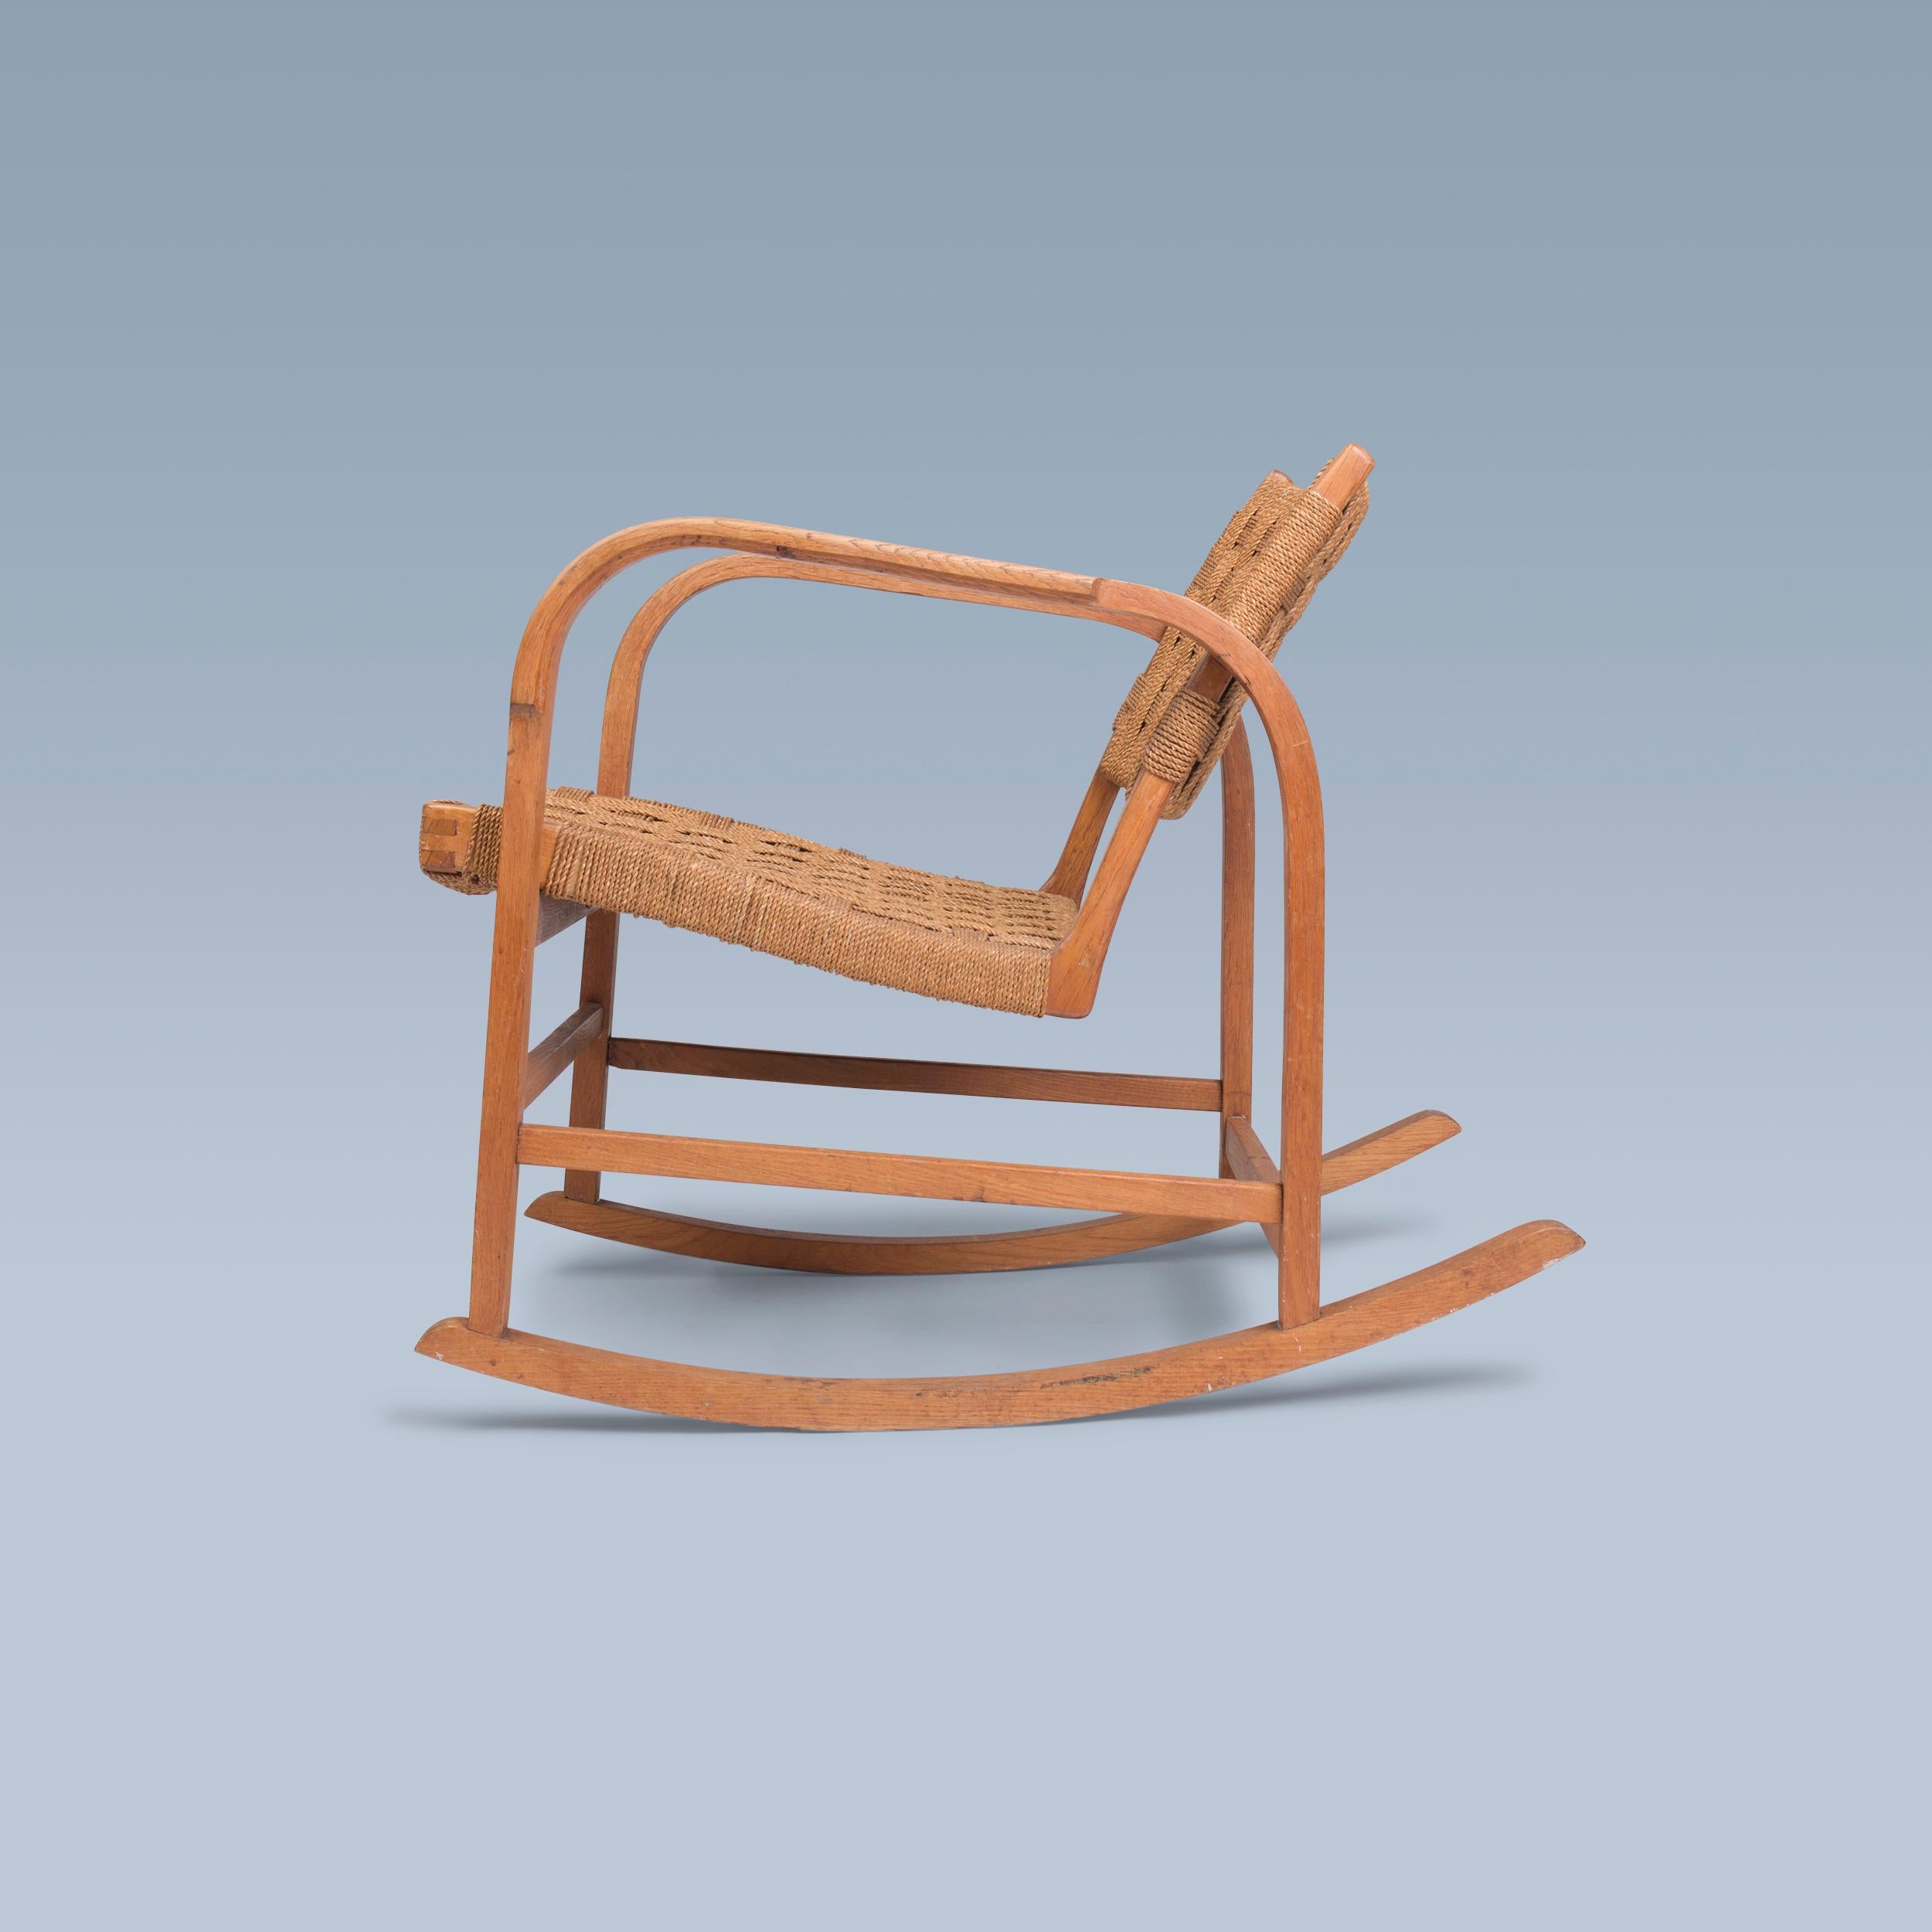 This rocking chair of patinated oak frame designed by Magnus Læssøe Stephensen (1903-1984) has seat and backrest of original woven seagrass.

It was executed by cabinetmaker Clausen in Brørup, Denmark. ca. in the 1930s.

Similar model presented at